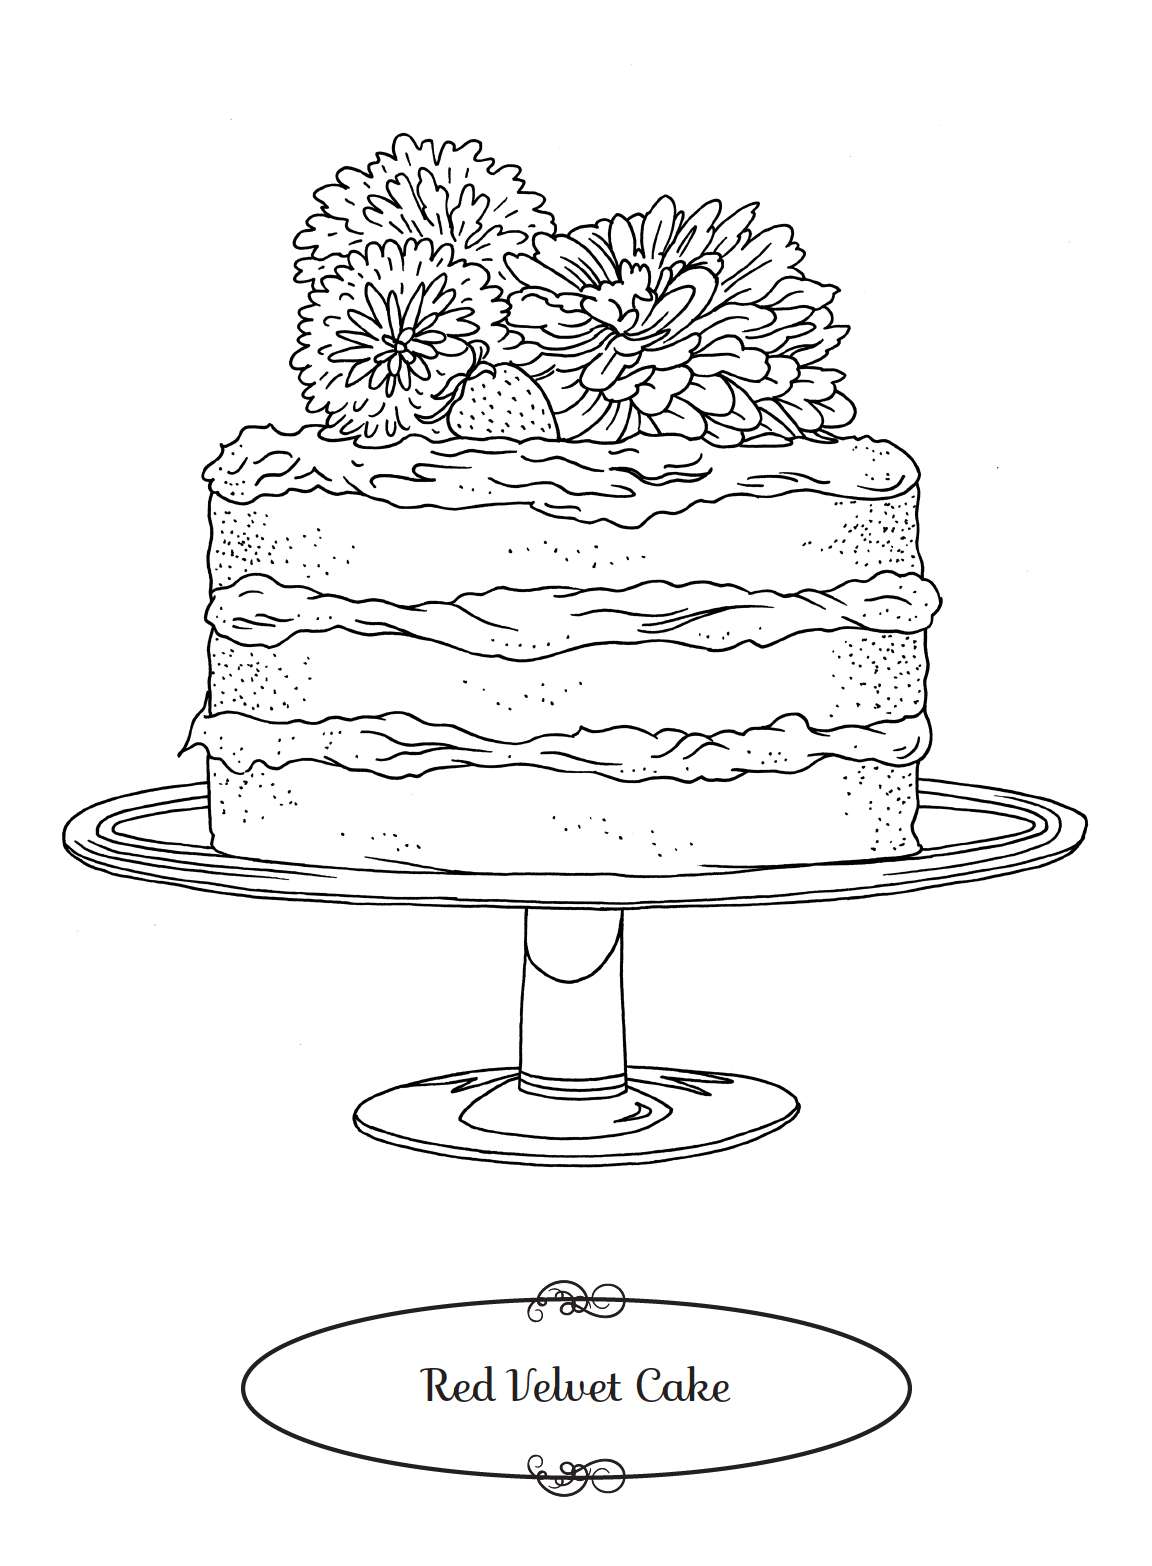 Red Velvet Cake Coloring Page